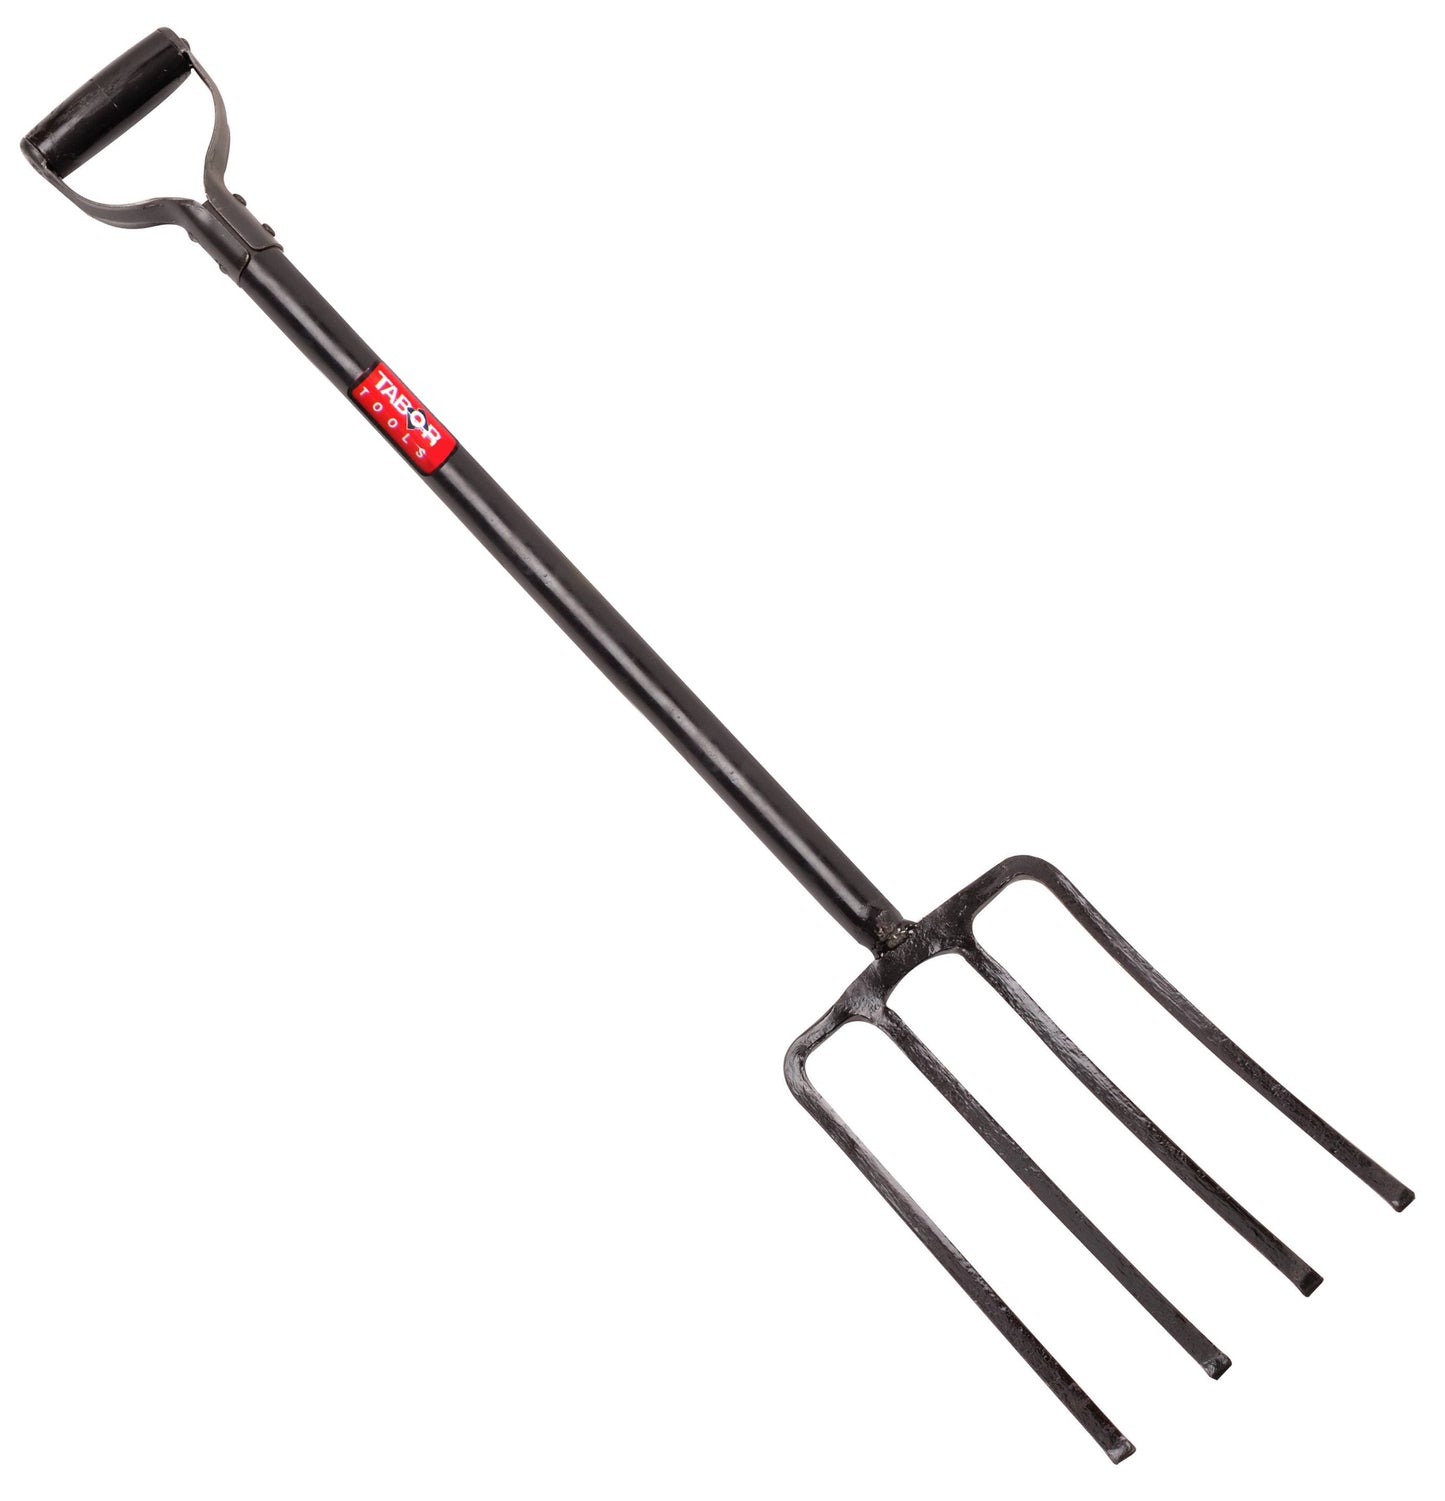 TABOR TOOLS Digging Fork, Steel Shaft, Super Heavy Duty 4 Tine Spading Fork, Virtually Unbreakable Garden Fork, 40 Inch Length. J59A.